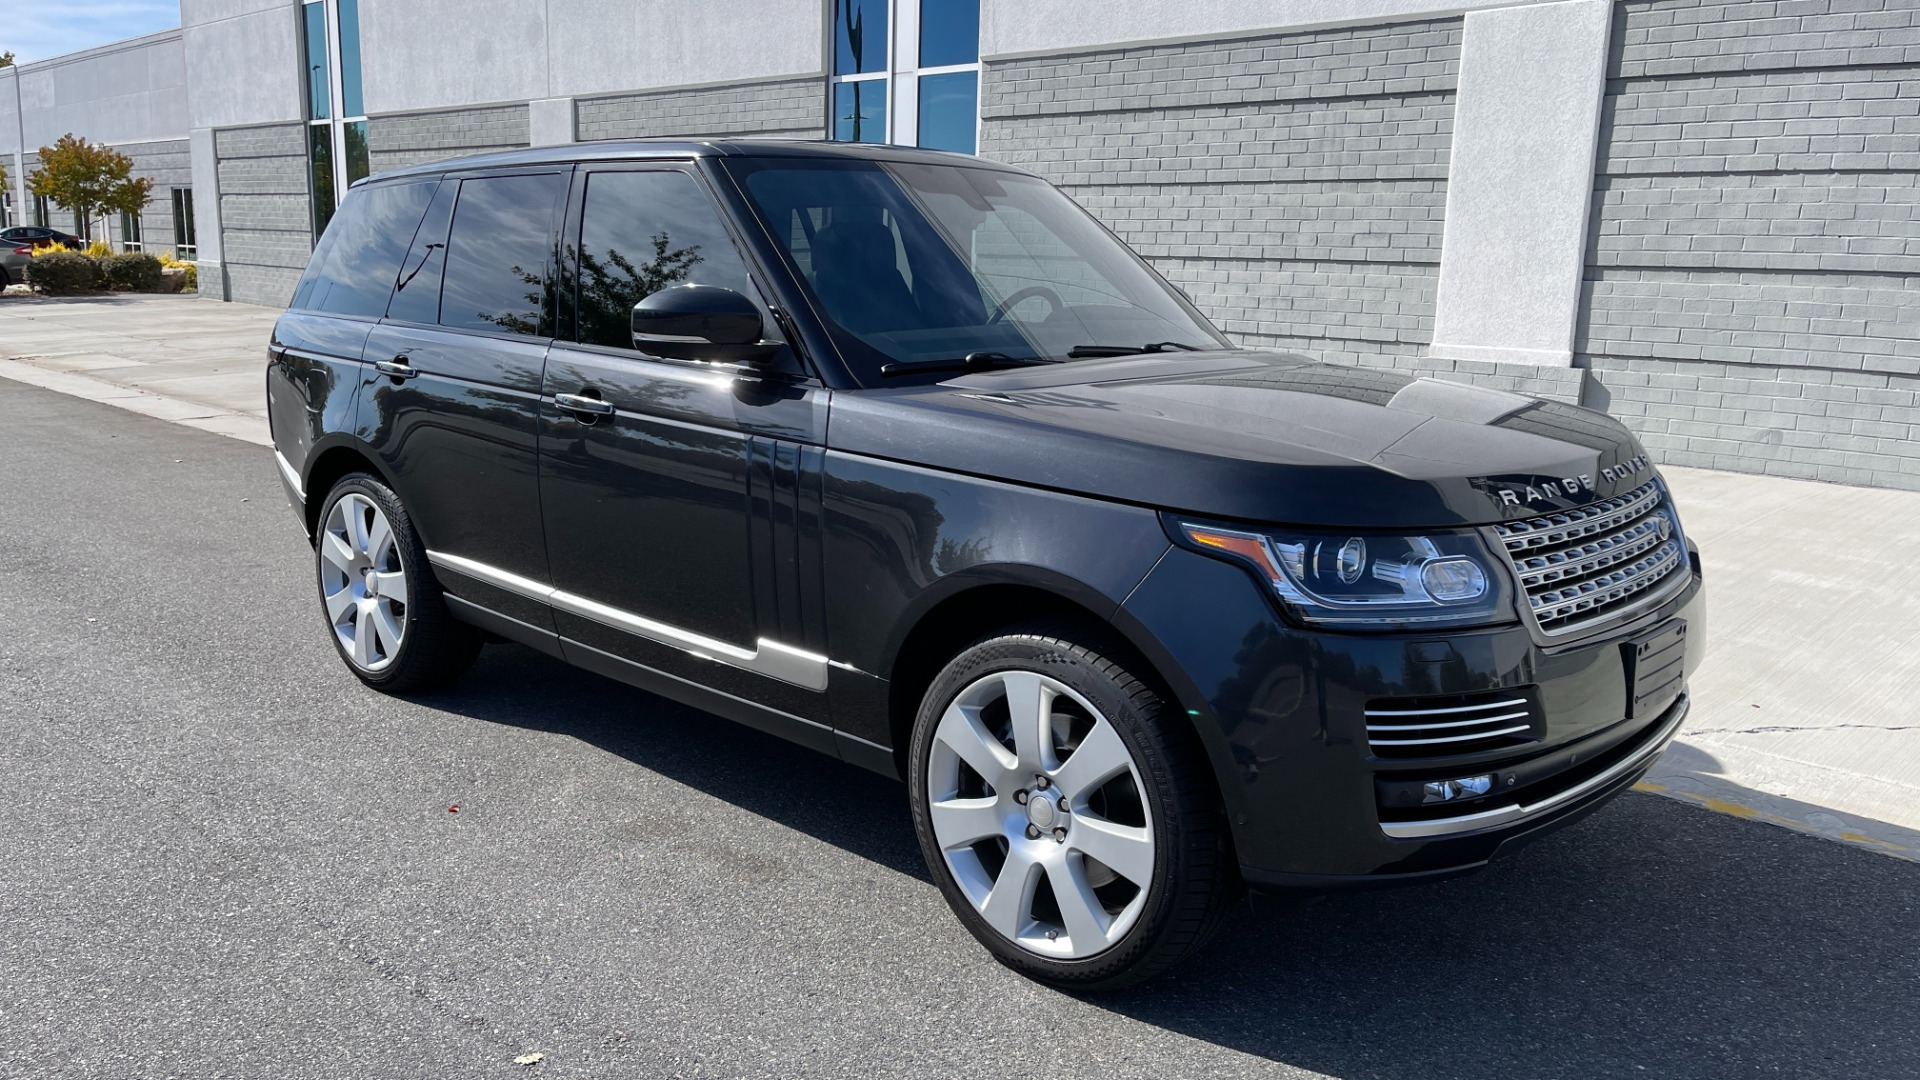 Used 2014 Land Rover Range Rover Supercharged Autobiography / 22IN WHEELS / PREMIUM PAINT / MASSAGE for sale $37,999 at Formula Imports in Charlotte NC 28227 7